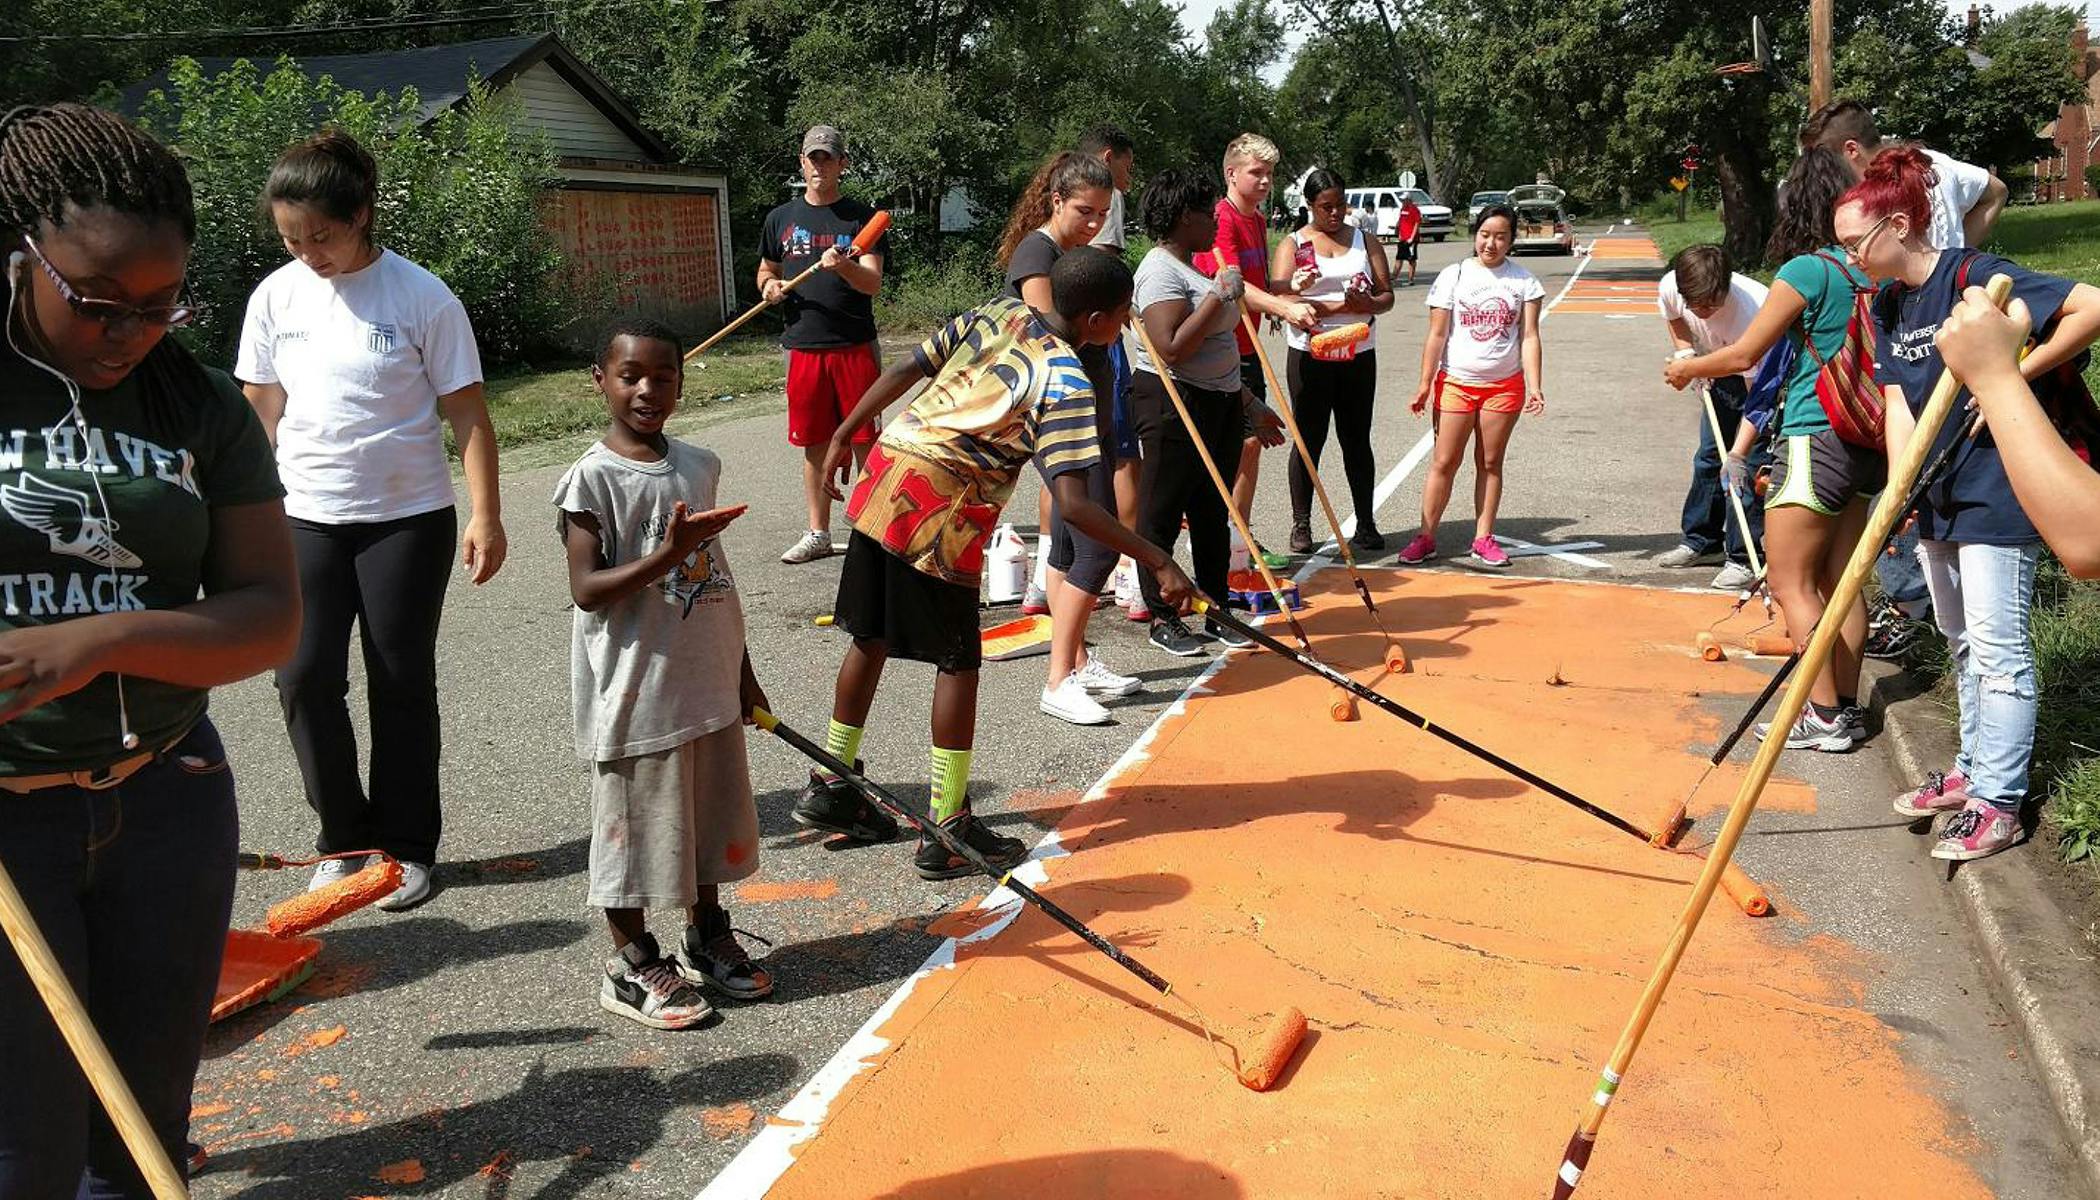 kids and teens work together to paint the proposed greenway in the neighborhood as part of the community engagement